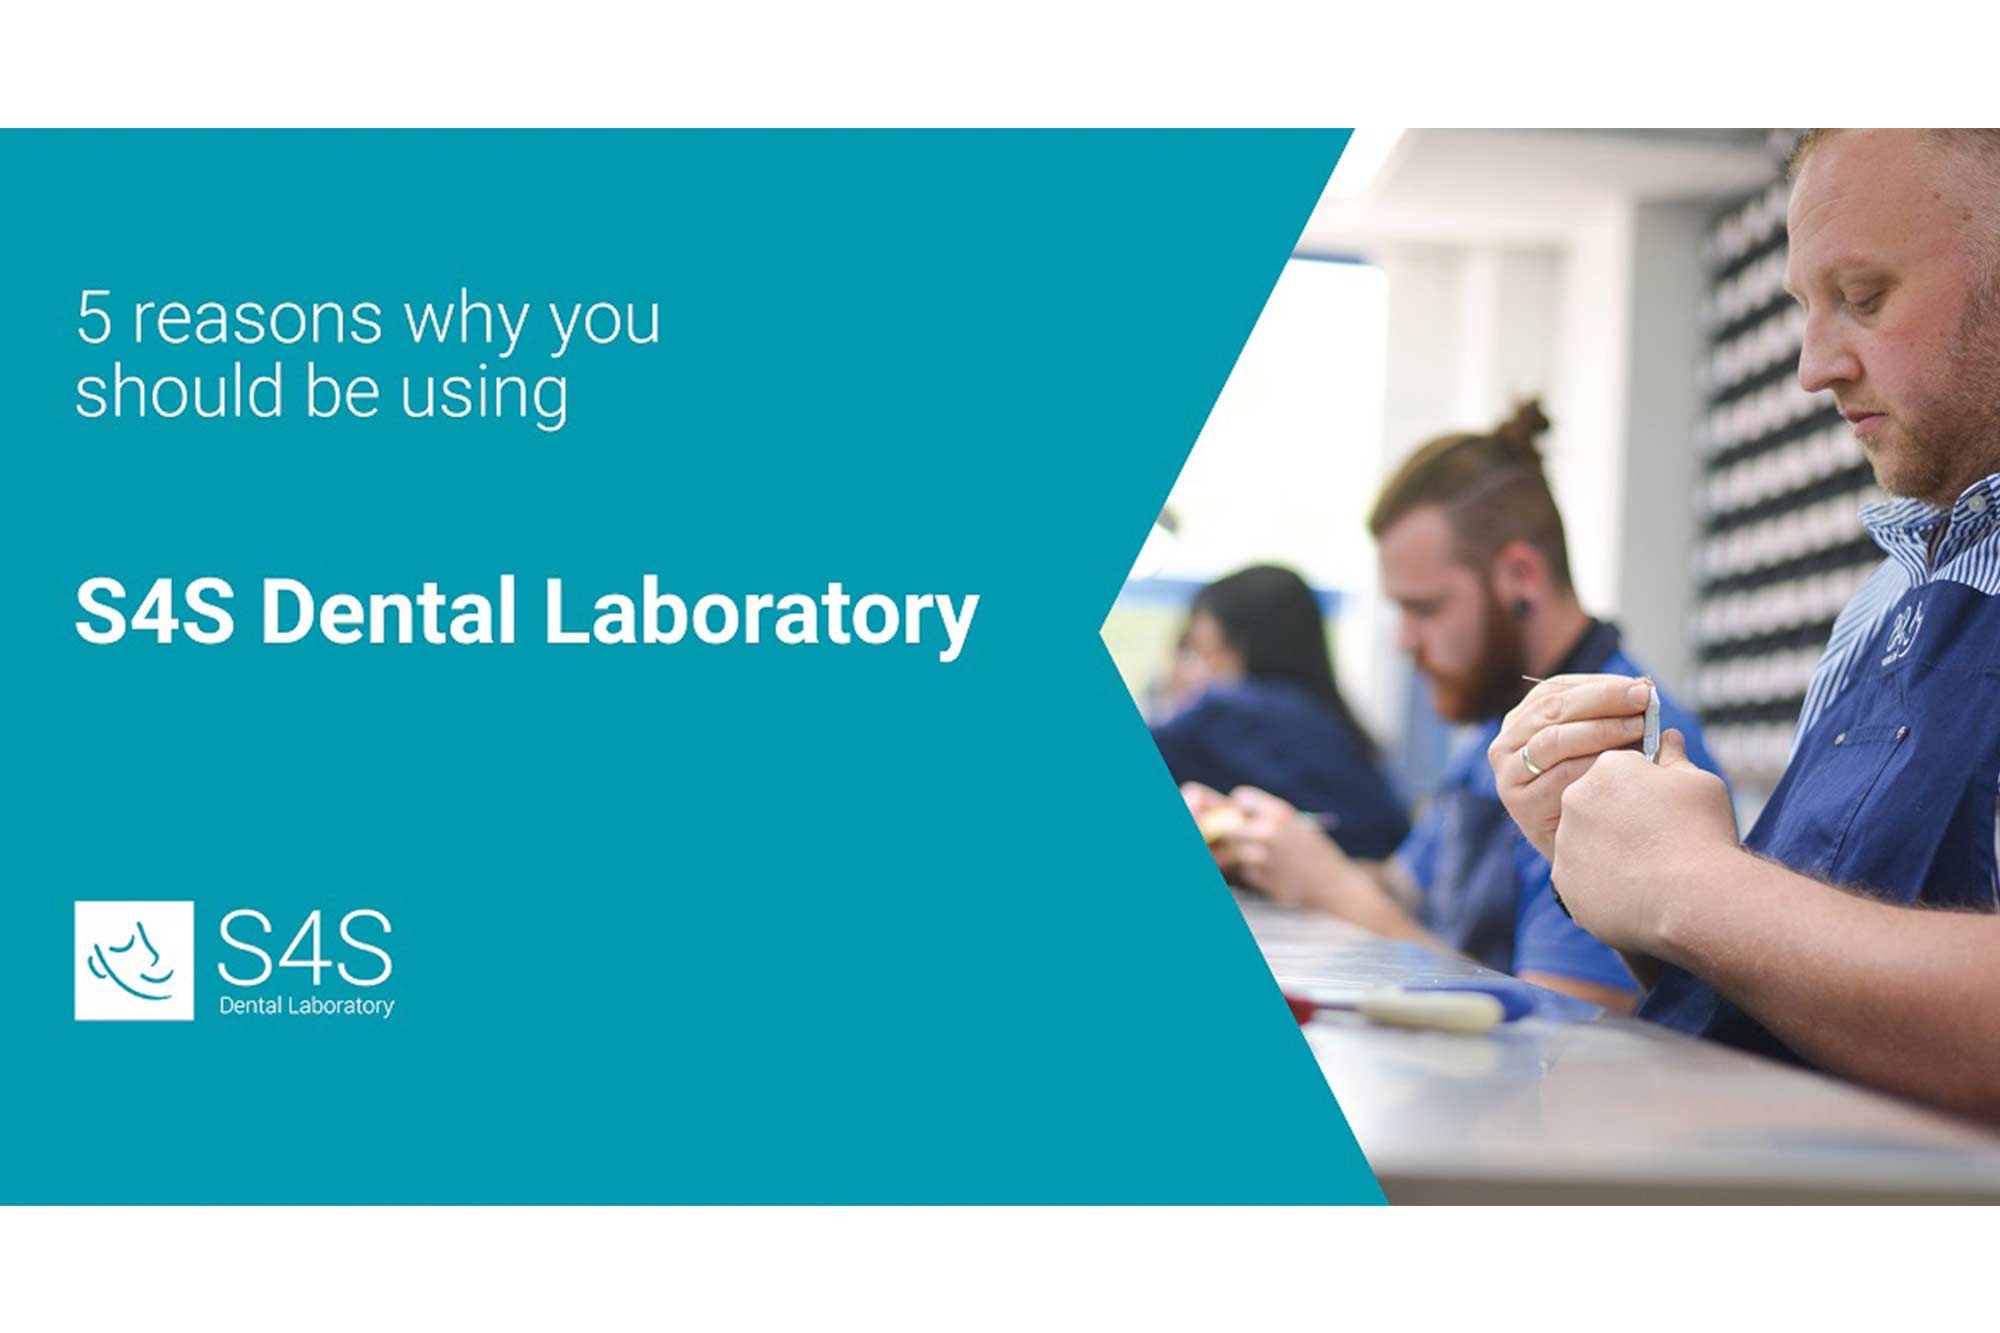 Five reasons why you should be using S4S dental laboratory